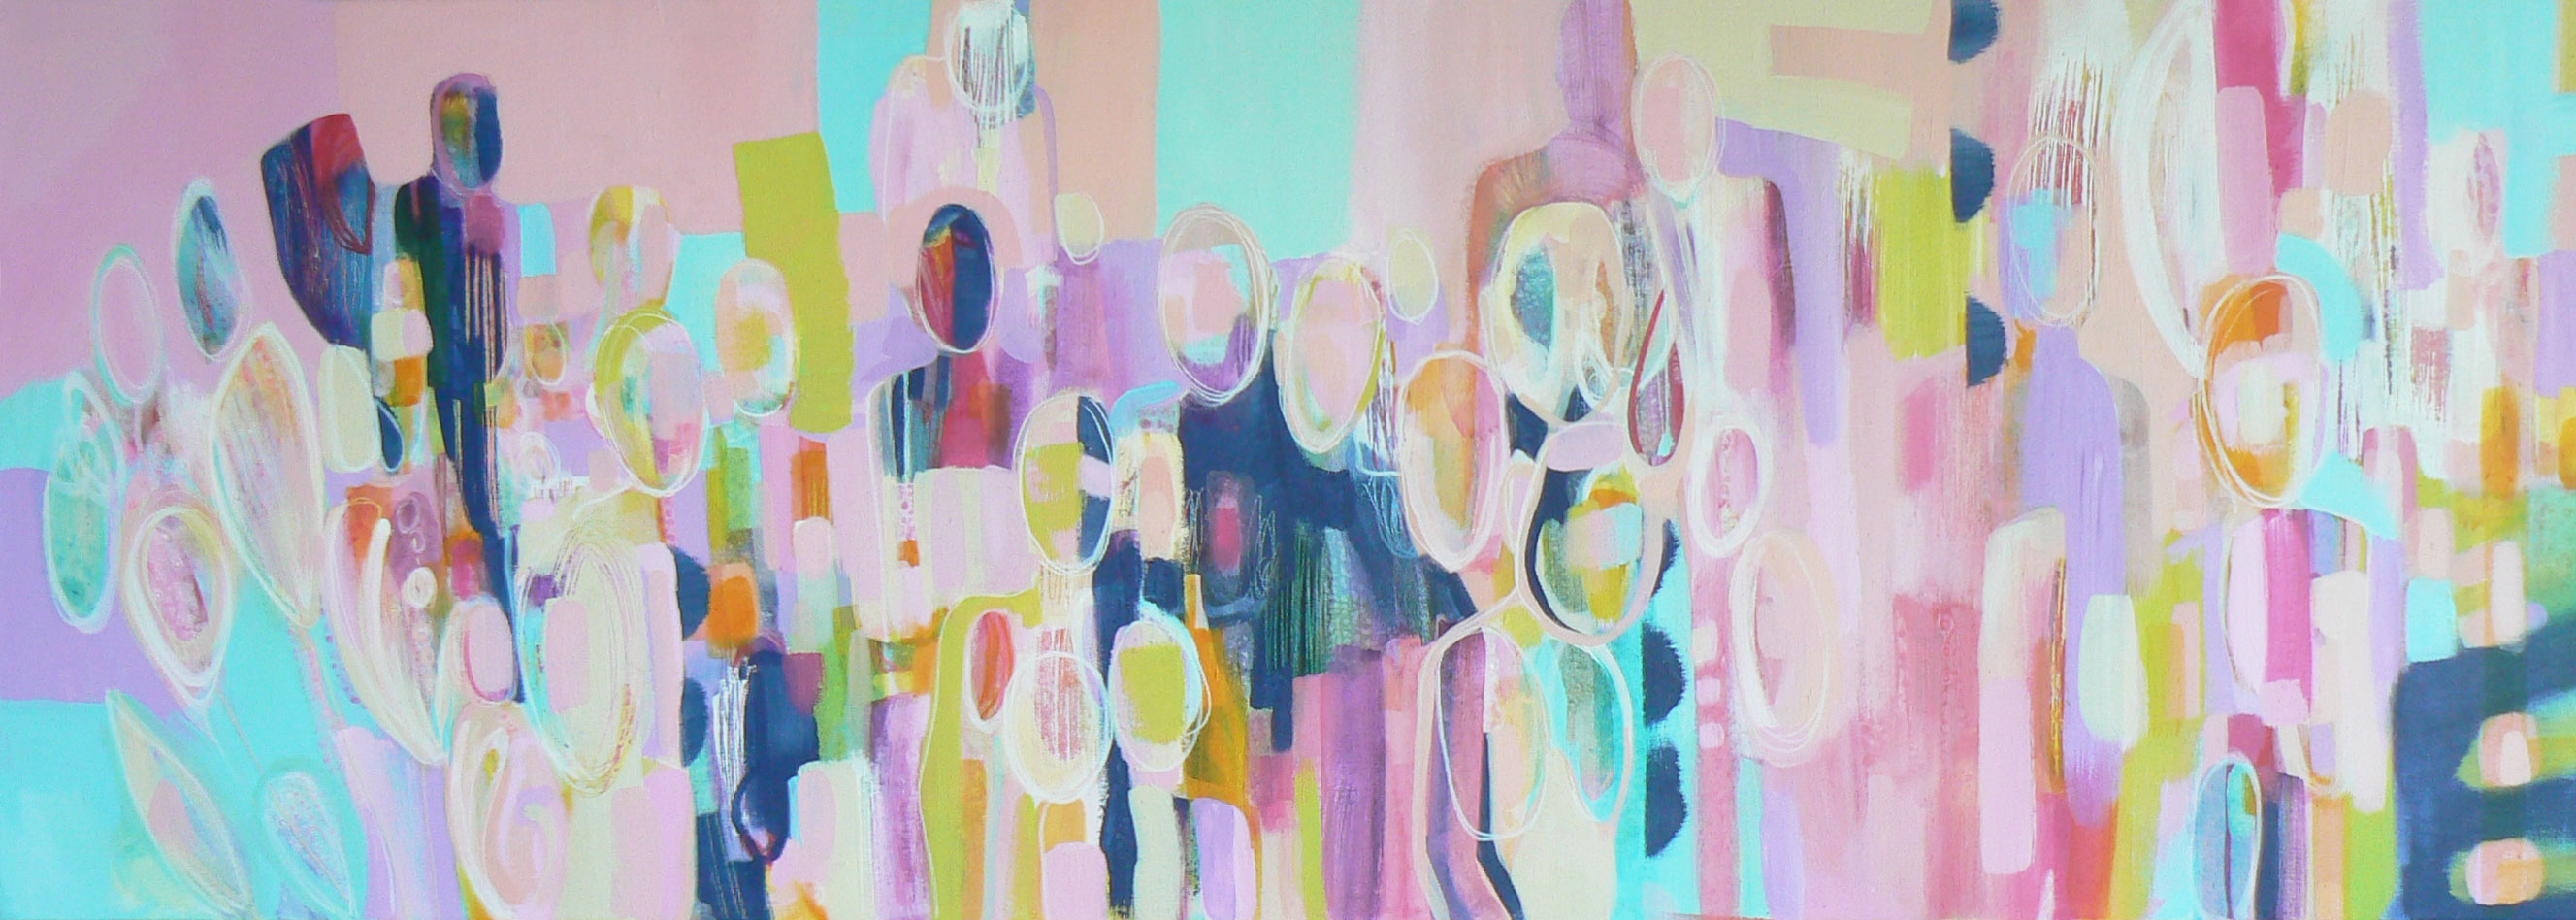 To each his own, 2015 Acrylic painting by Carolynne Coulson